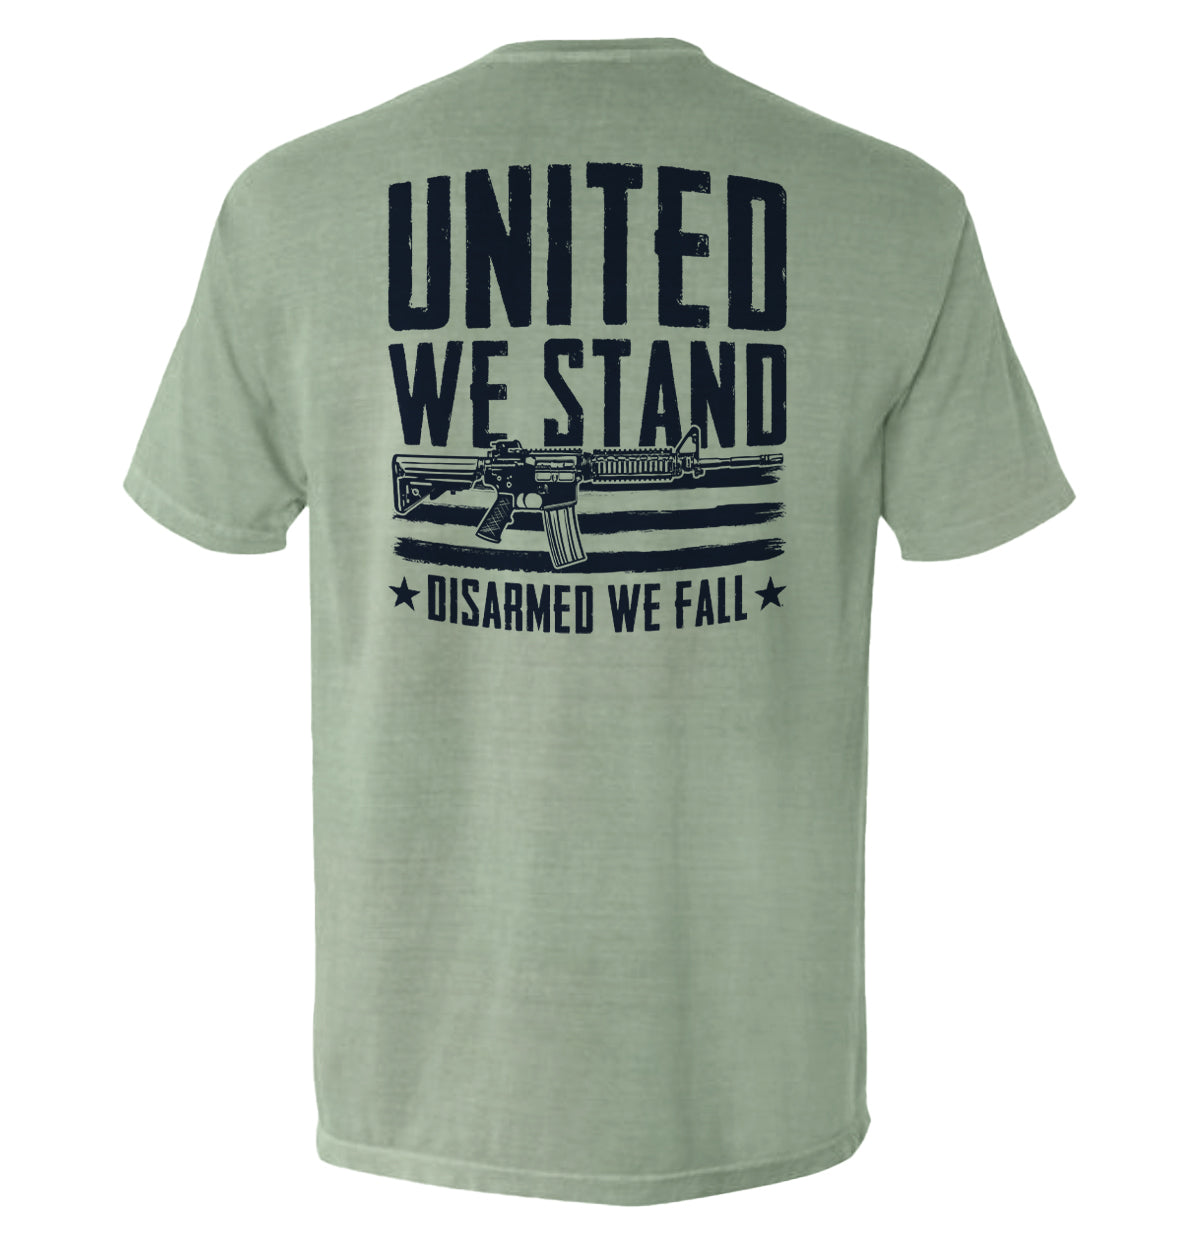 United We Stand Disarmed We Fall